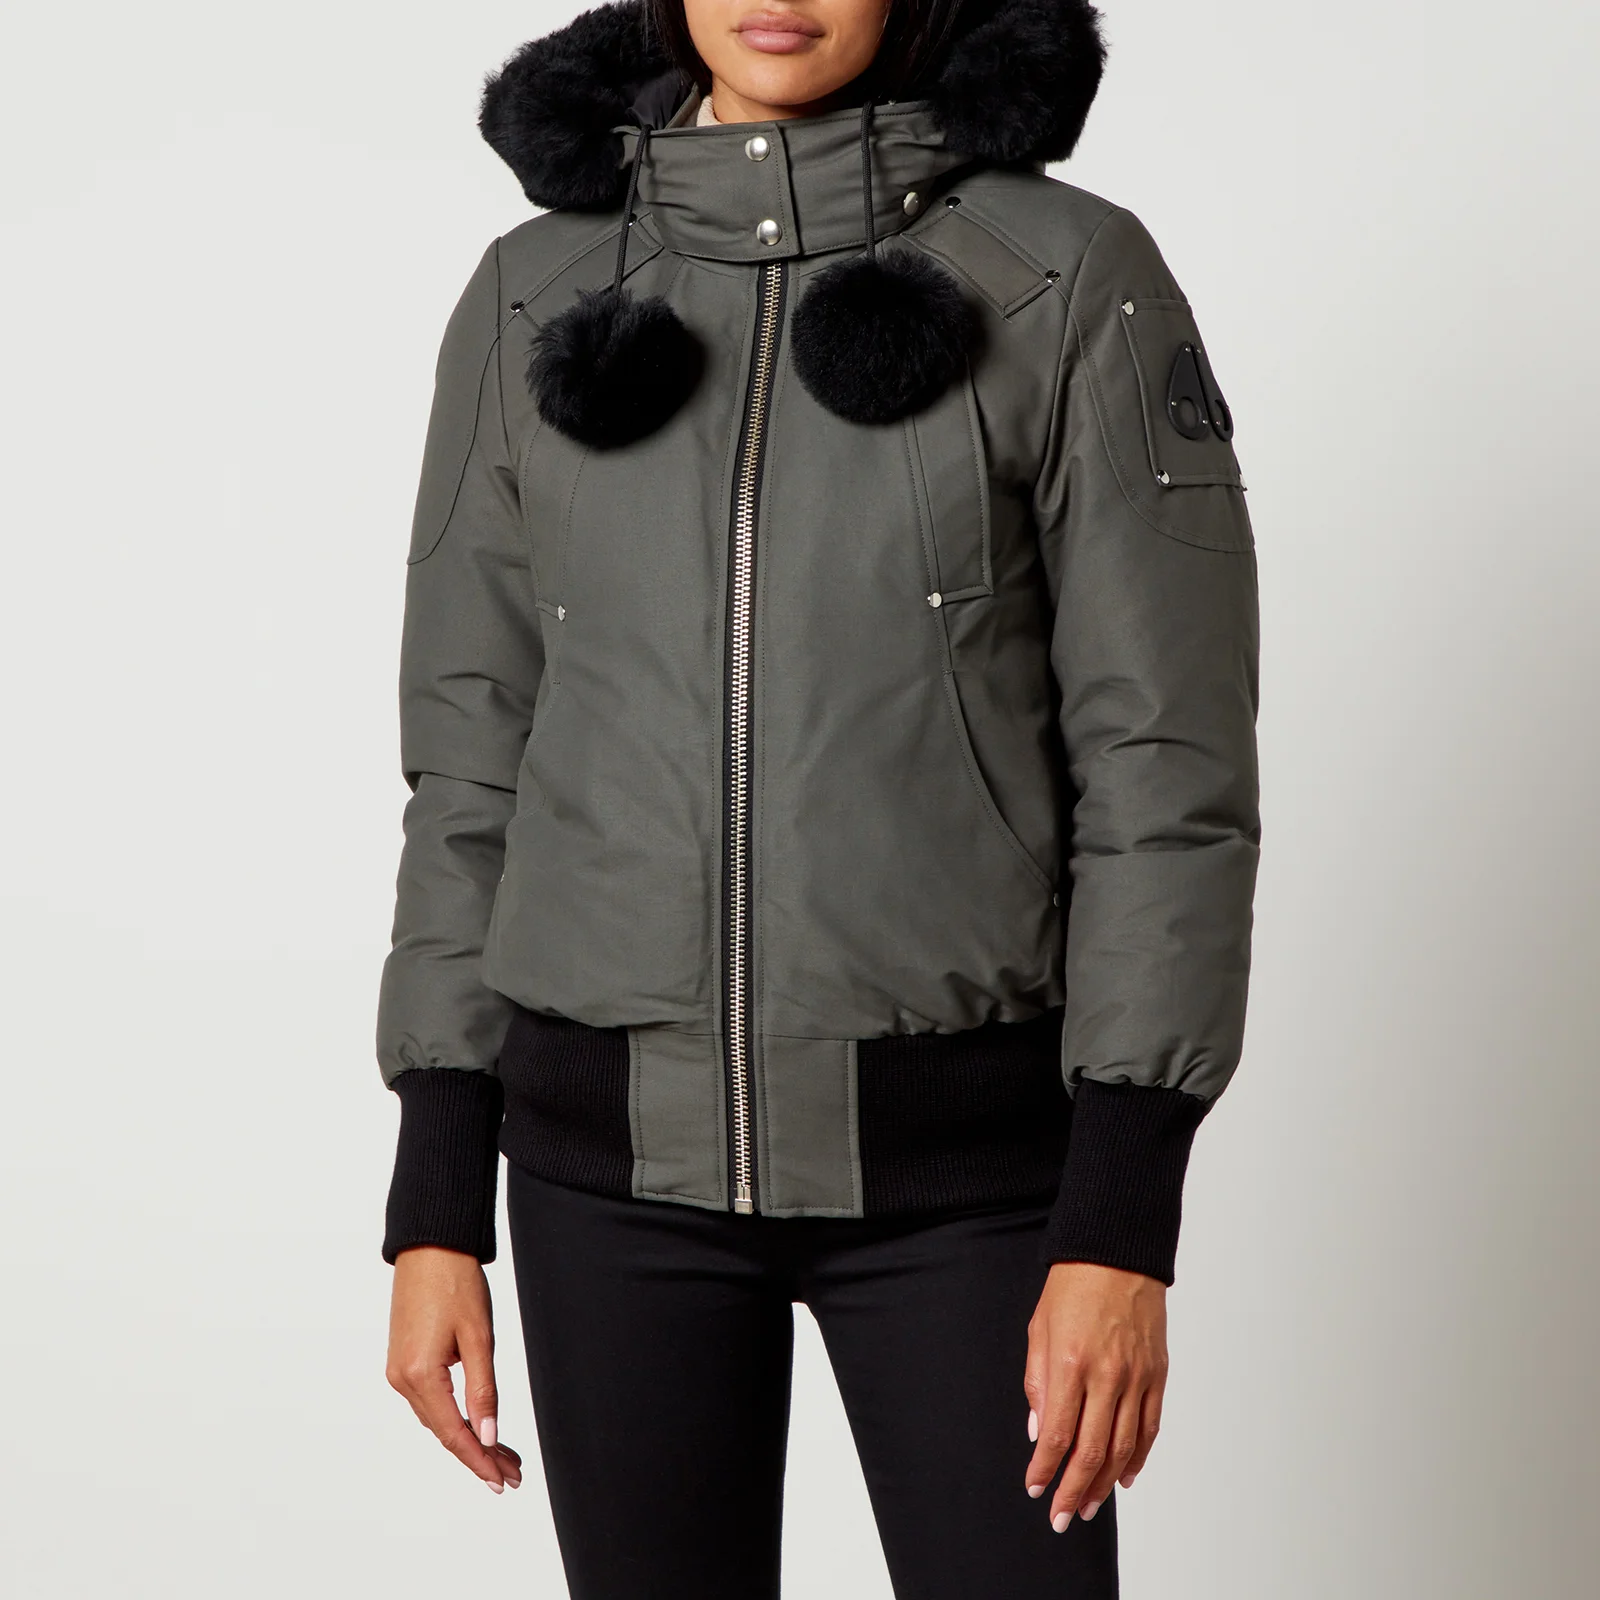 Moose Knuckles Debbie Cotton and Nylon Bomber Jacket - XS Image 1